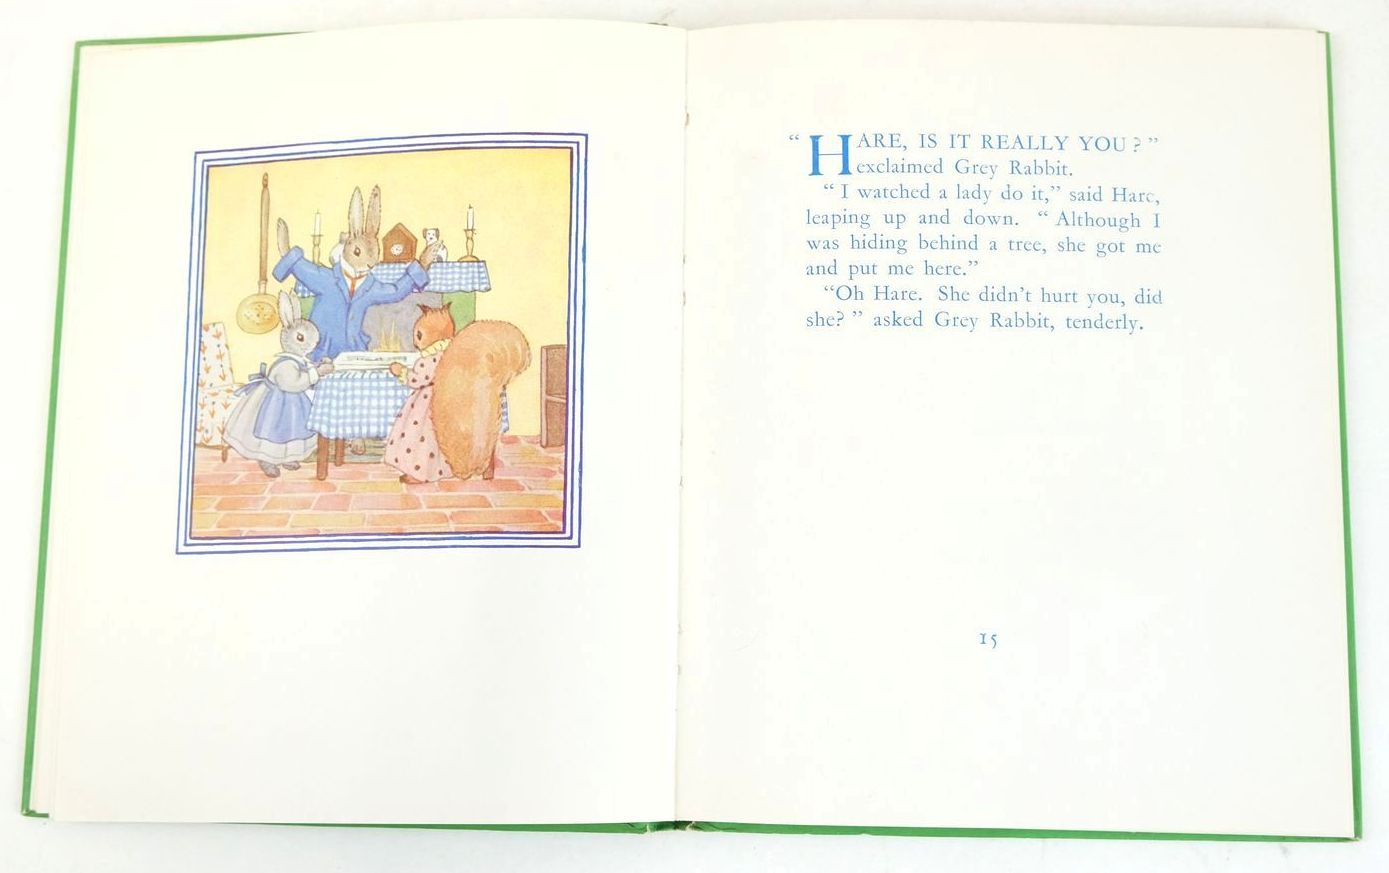 Photo of LITTLE GREY RABBIT'S PAINT-BOX written by Uttley, Alison illustrated by Tempest, Margaret published by Collins (STOCK CODE: 1325537)  for sale by Stella & Rose's Books